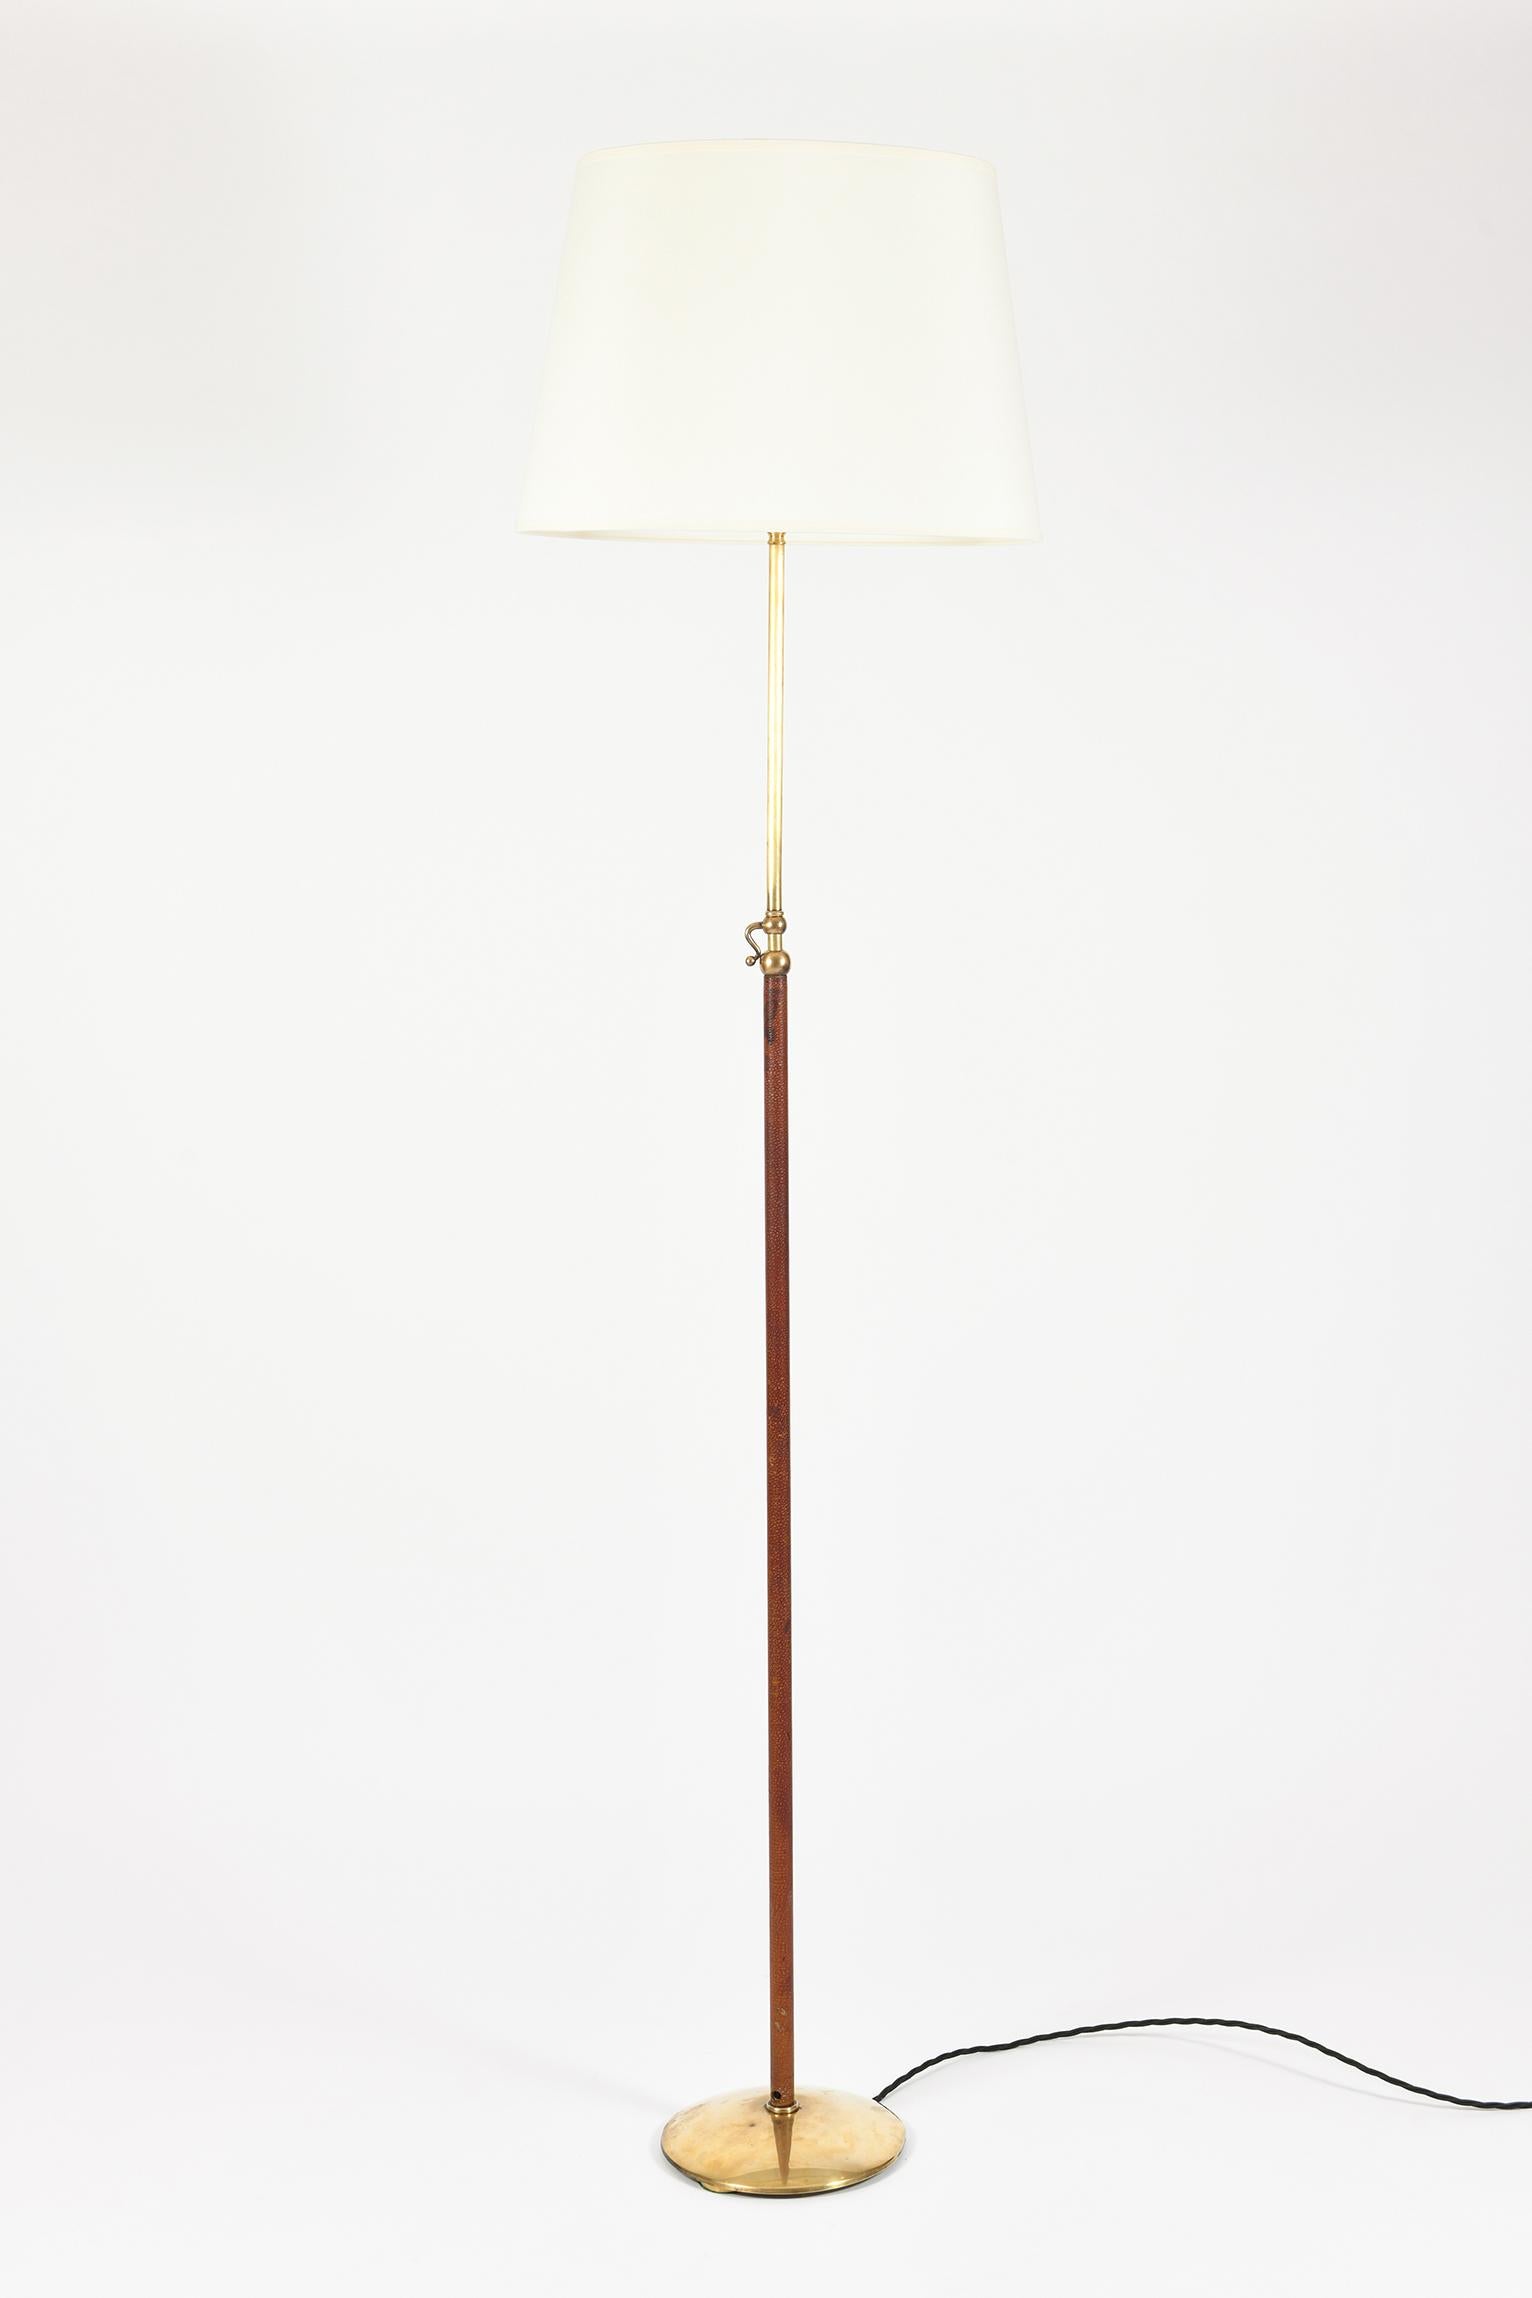 A telescopic brass and saddle stitched brown leather floor lamp, in the manner of Jacques Adnet
France, circa 1950
The stated dimensions include the shade and the set height as shown on the photos, and can be much taller when extending the